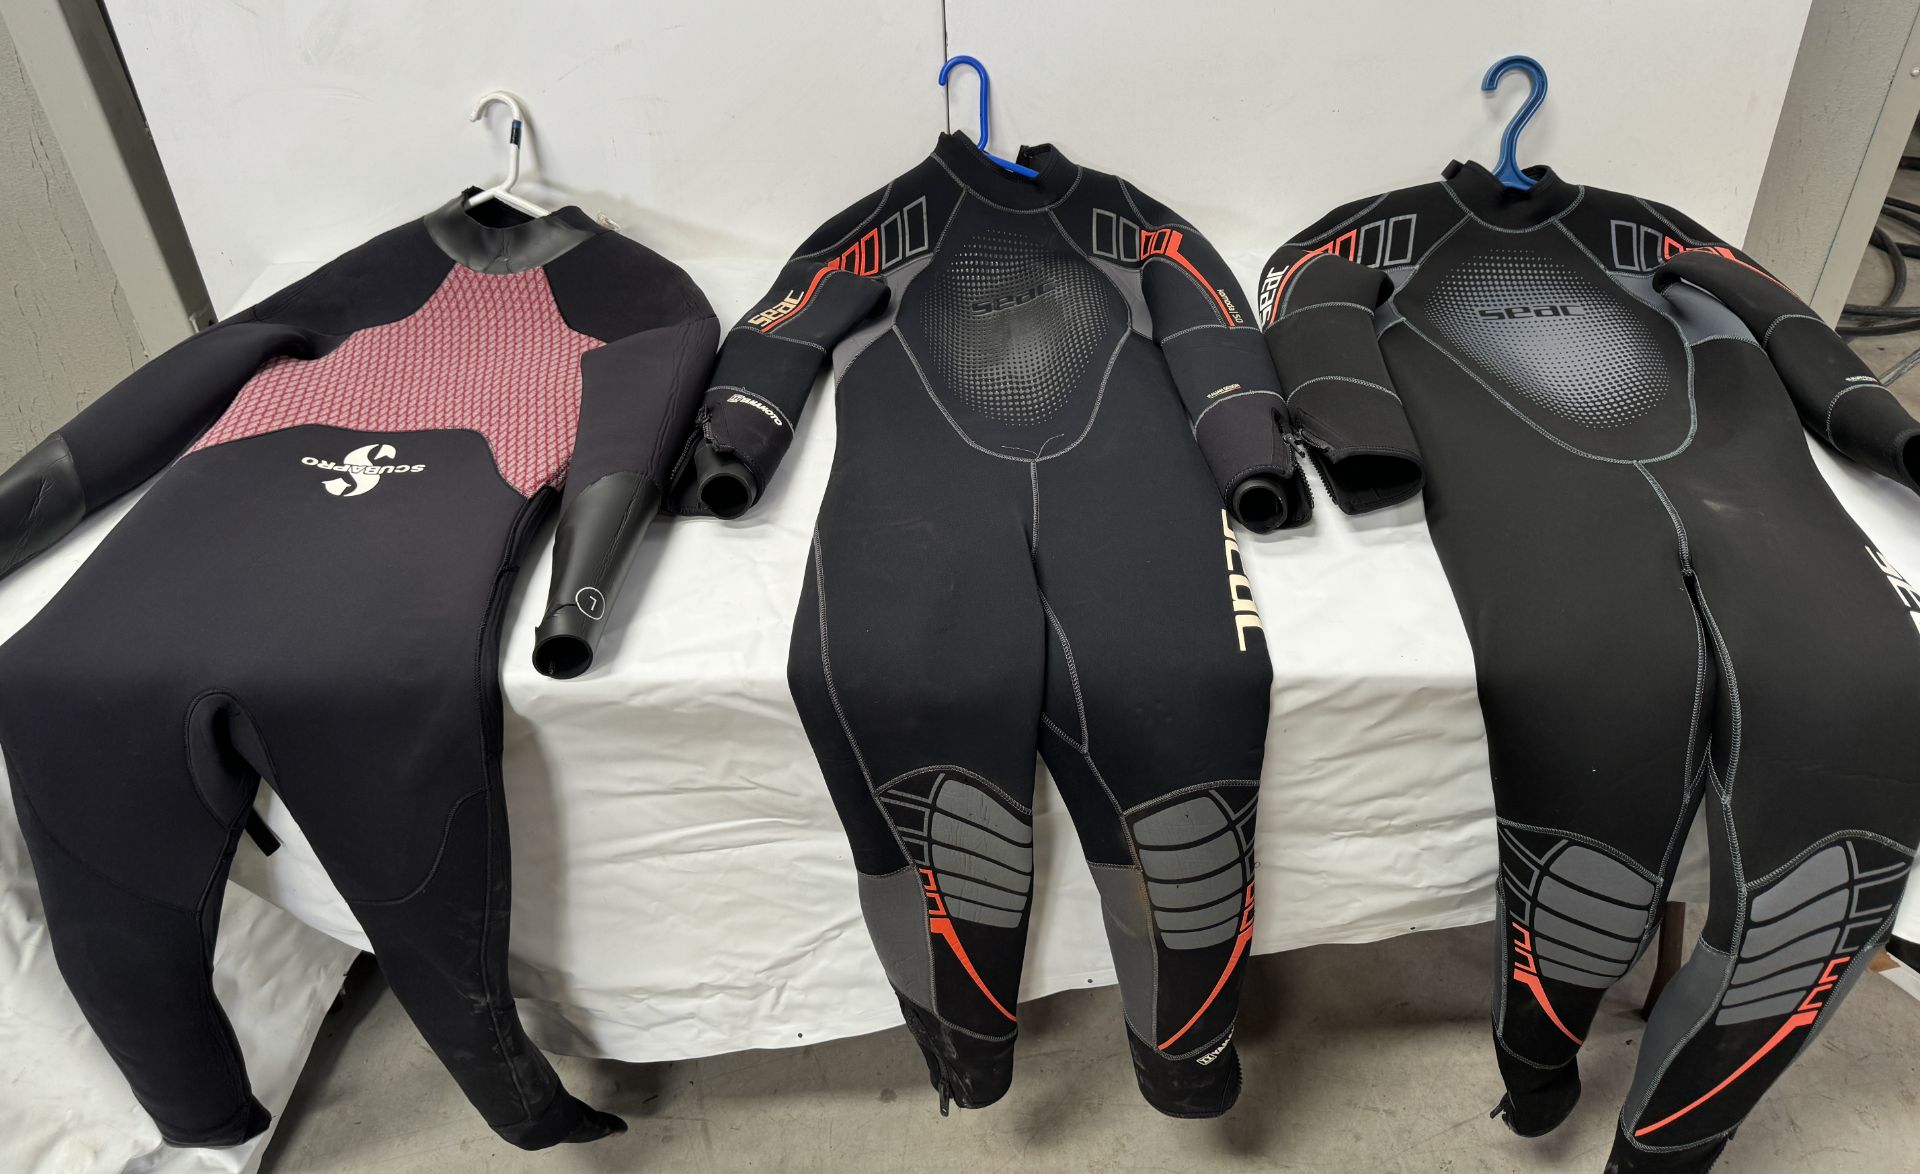 Six O’Neill, Beuchat, Seac Wetsuits (Location: Brentwood. Please Refer to General Notes) - Image 11 of 18